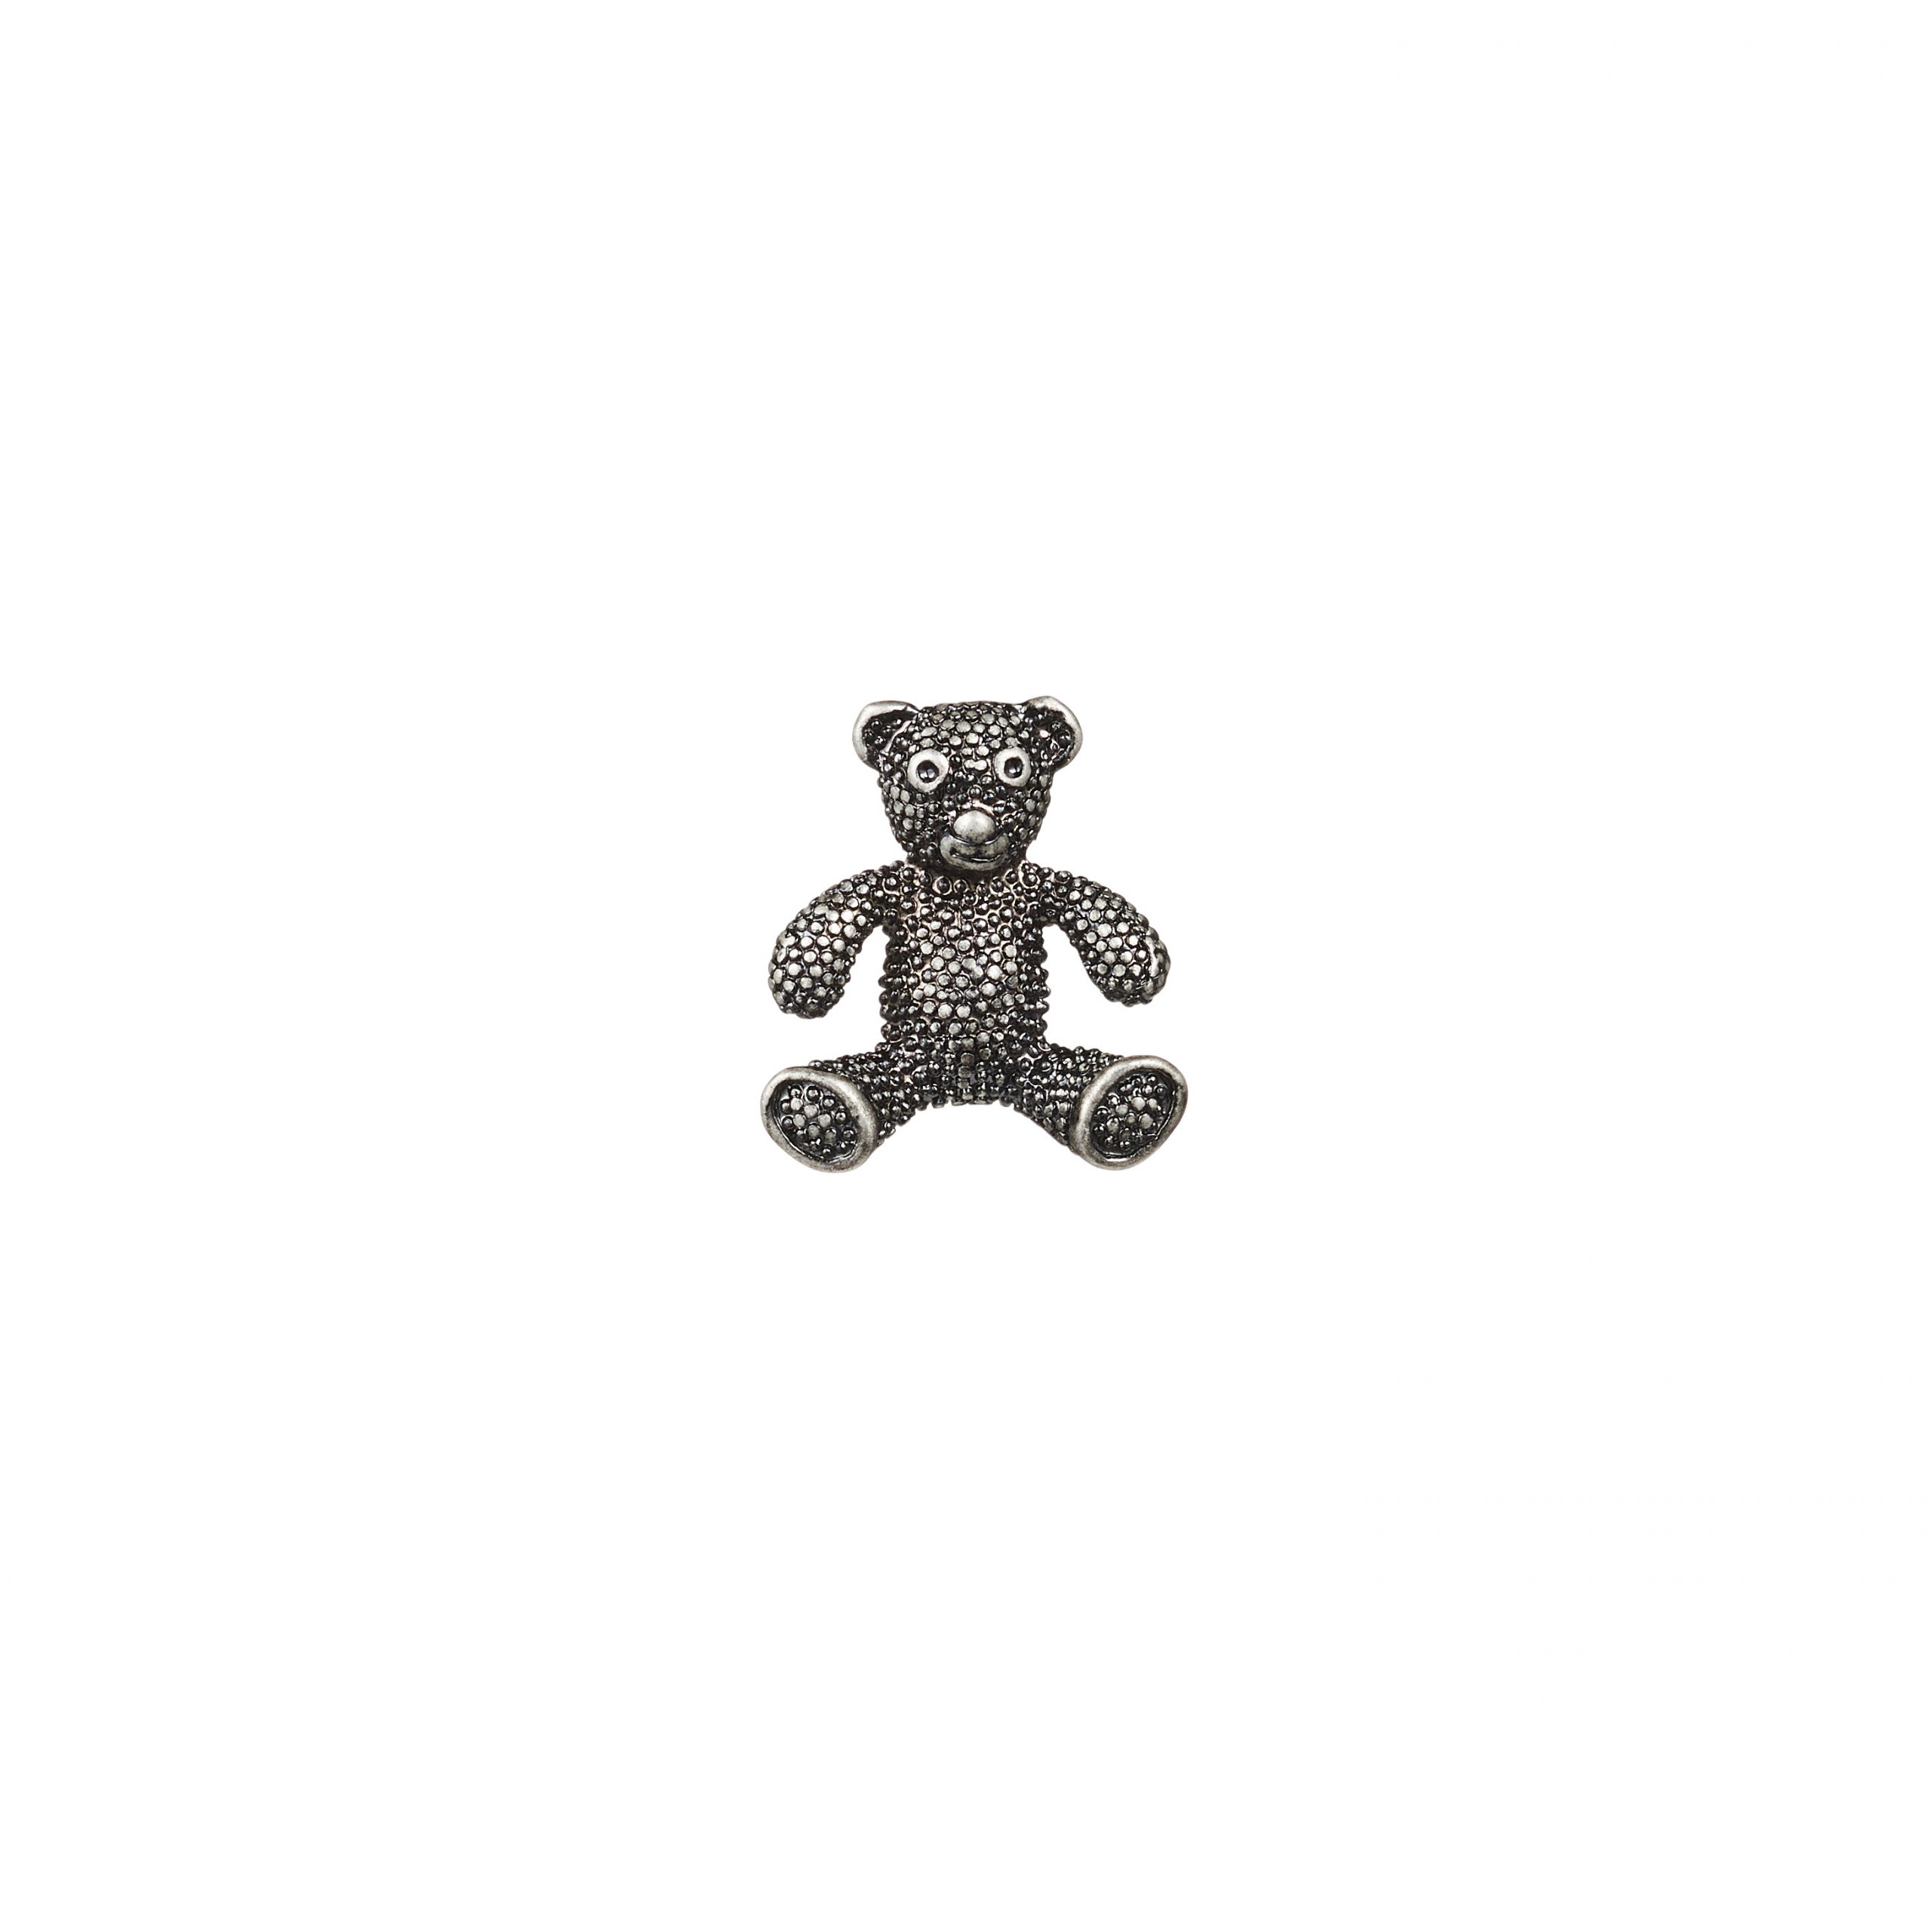 Antique plated Teddy Bear Lapel Pin